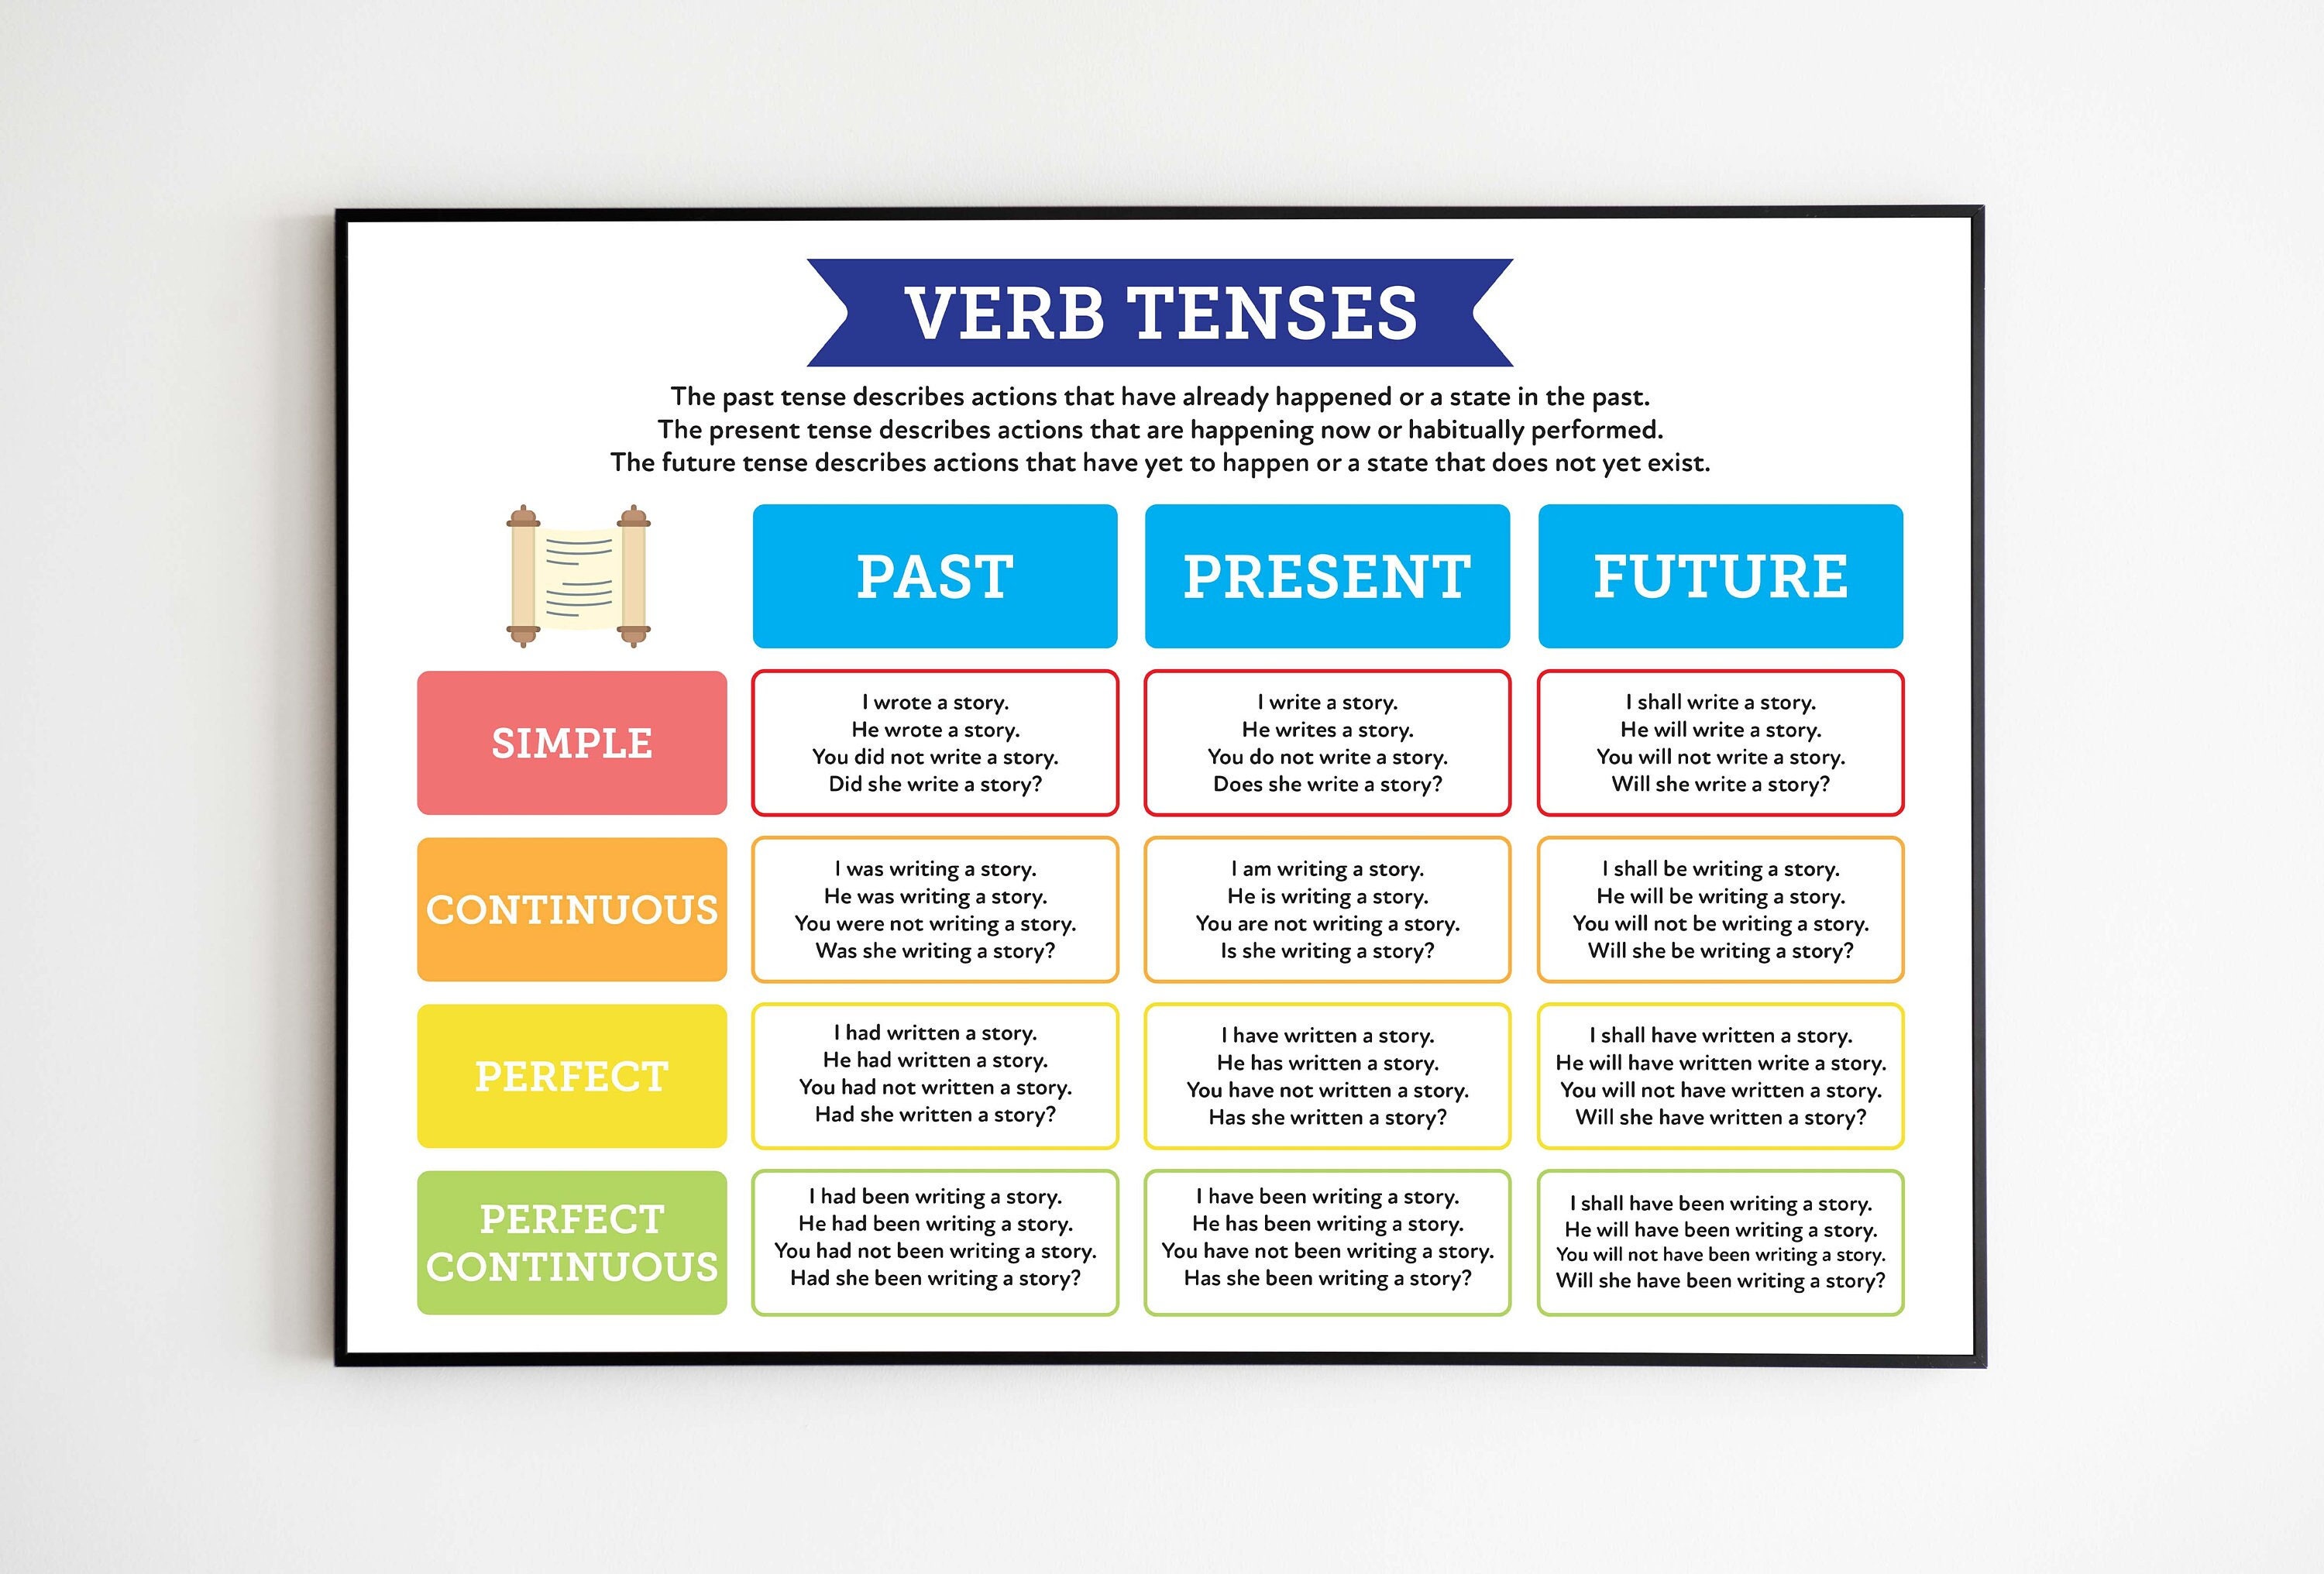 english-grammar-tense-table-quick-guide-to-verb-tenses-etsy-finland-268